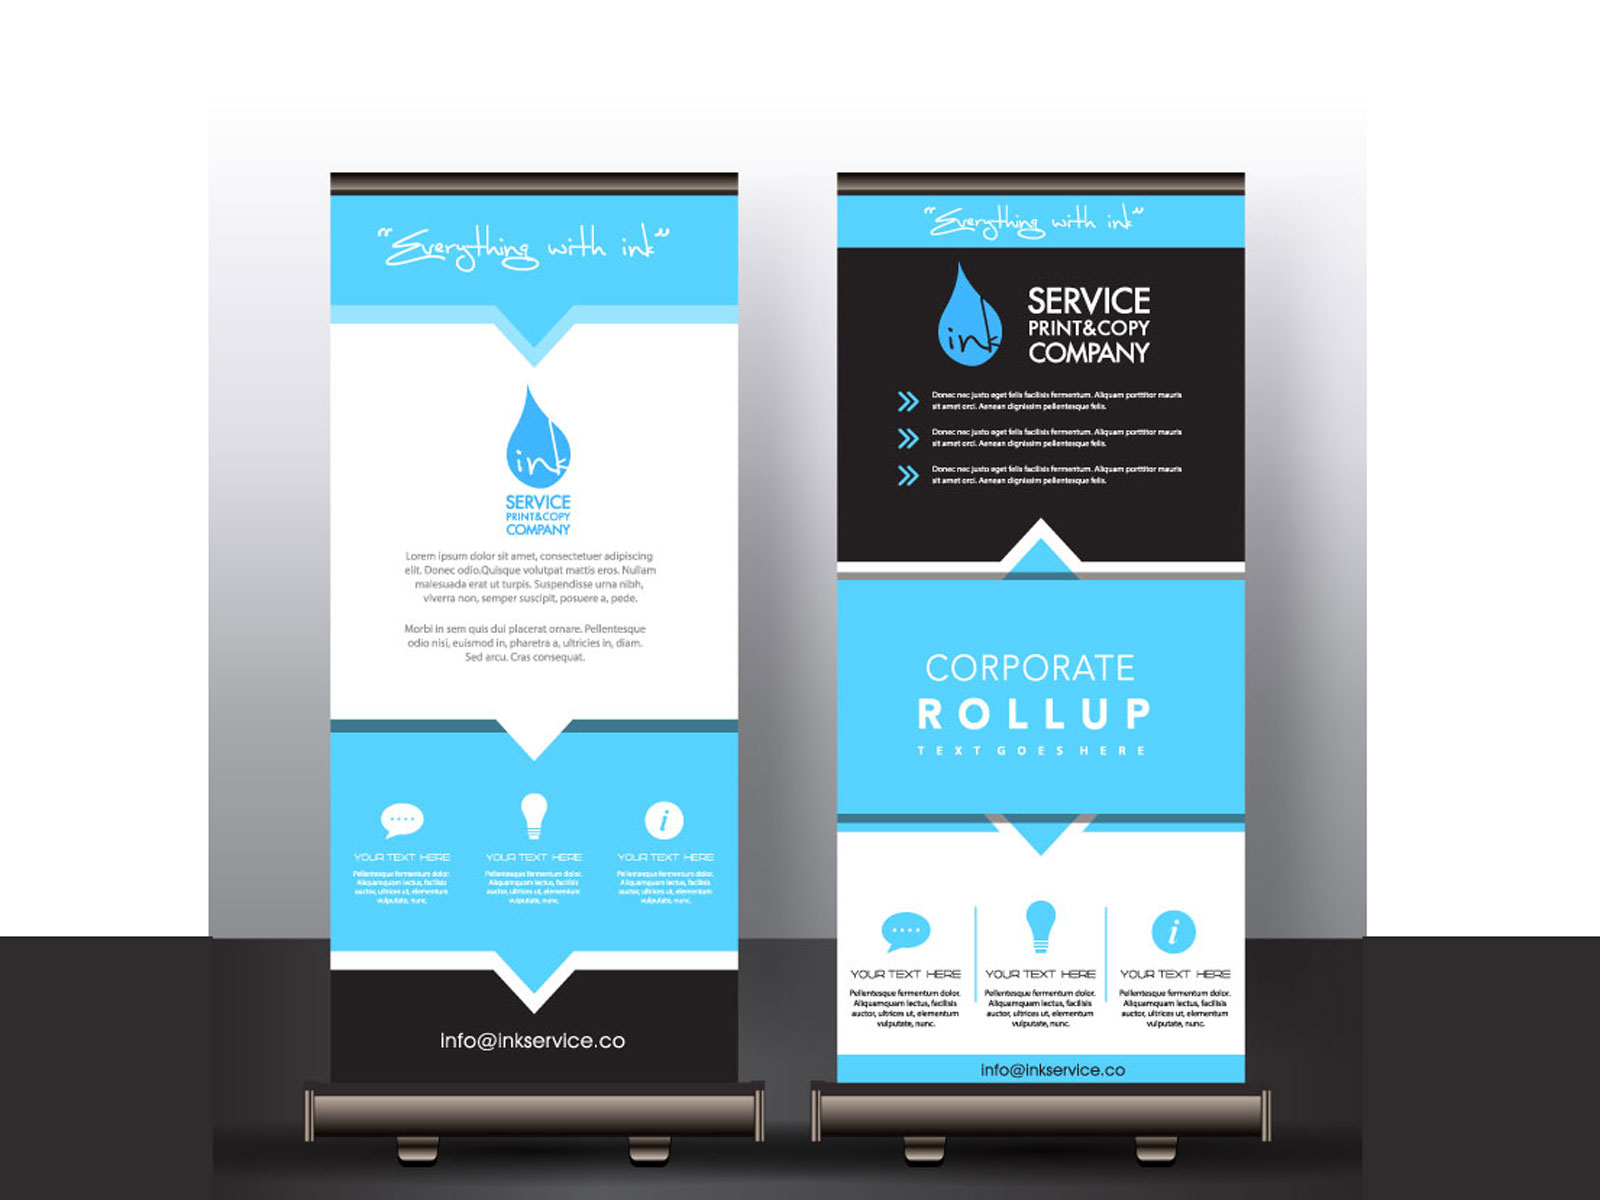 standup banner rollup banners - stand-up banners - in Kuwait for personal and commercial use - inkservice